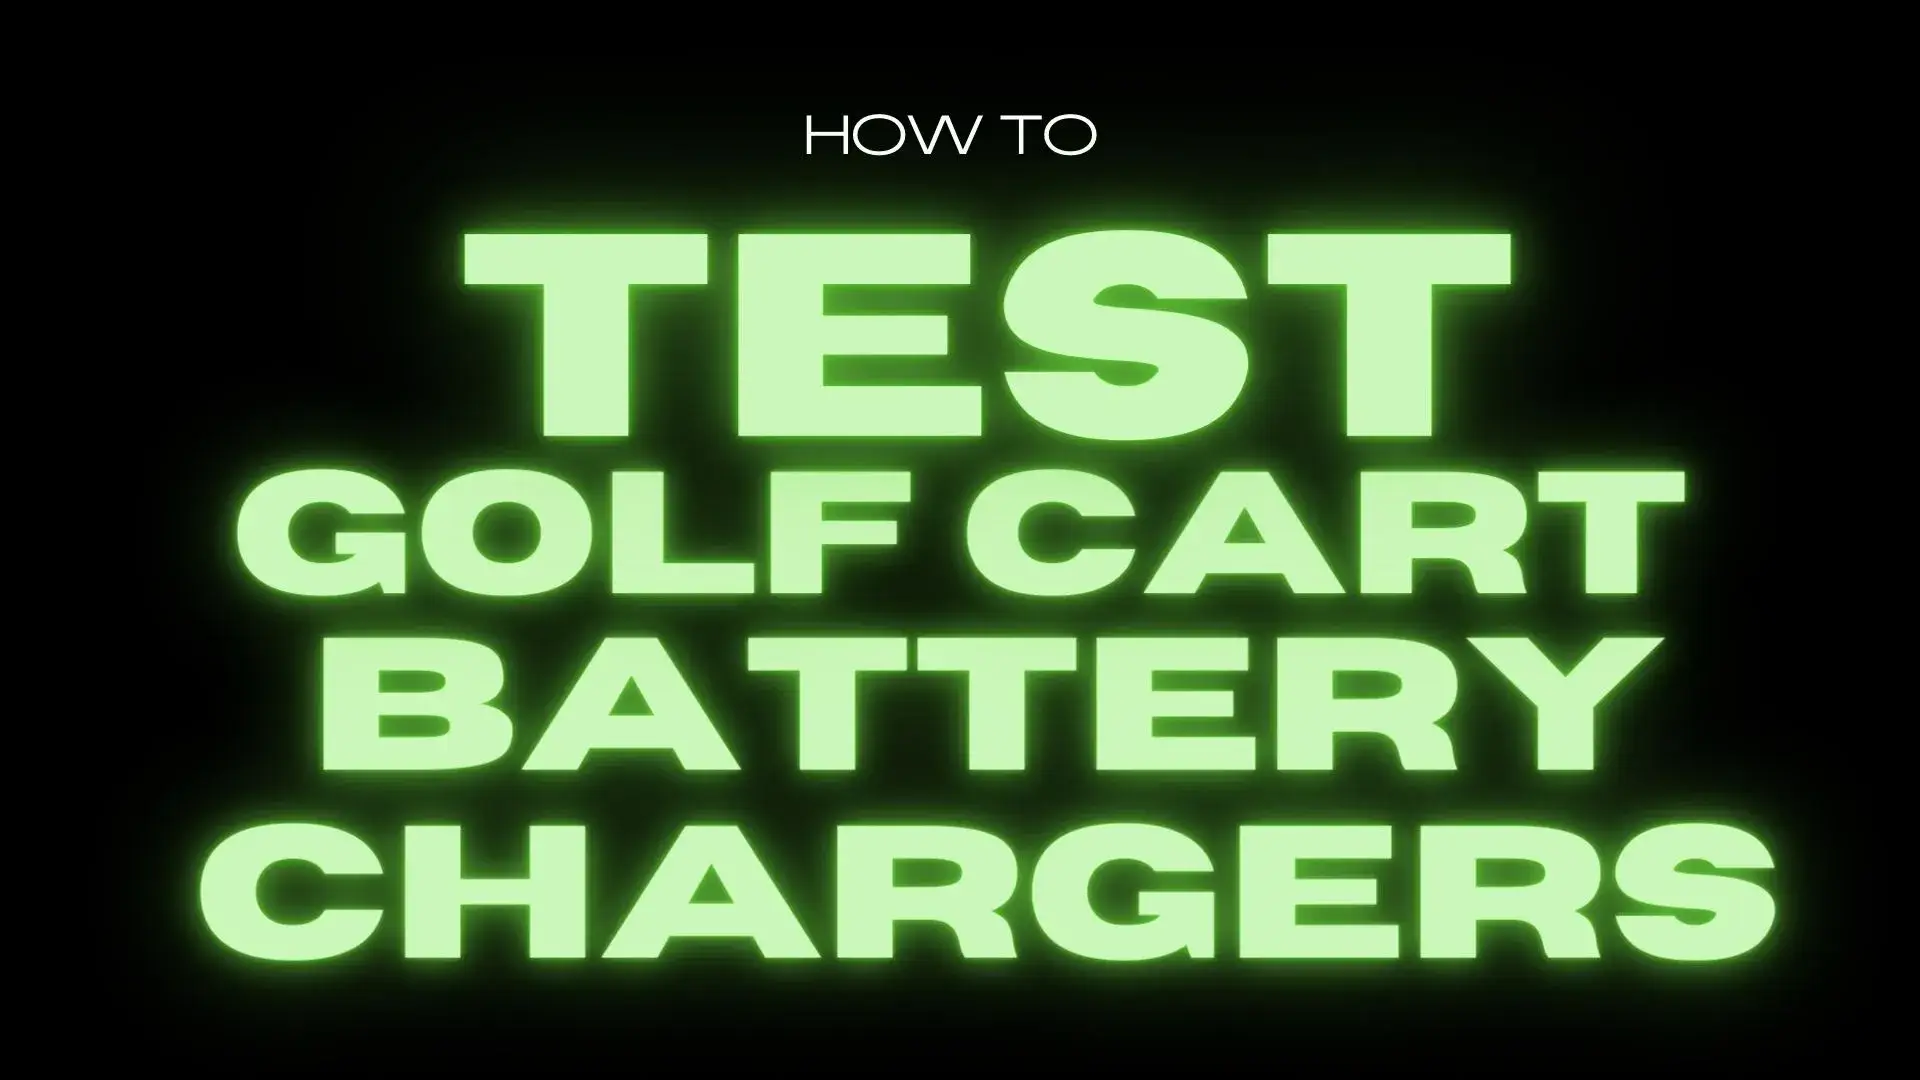 How to Test Golf Cart Battery Chargers